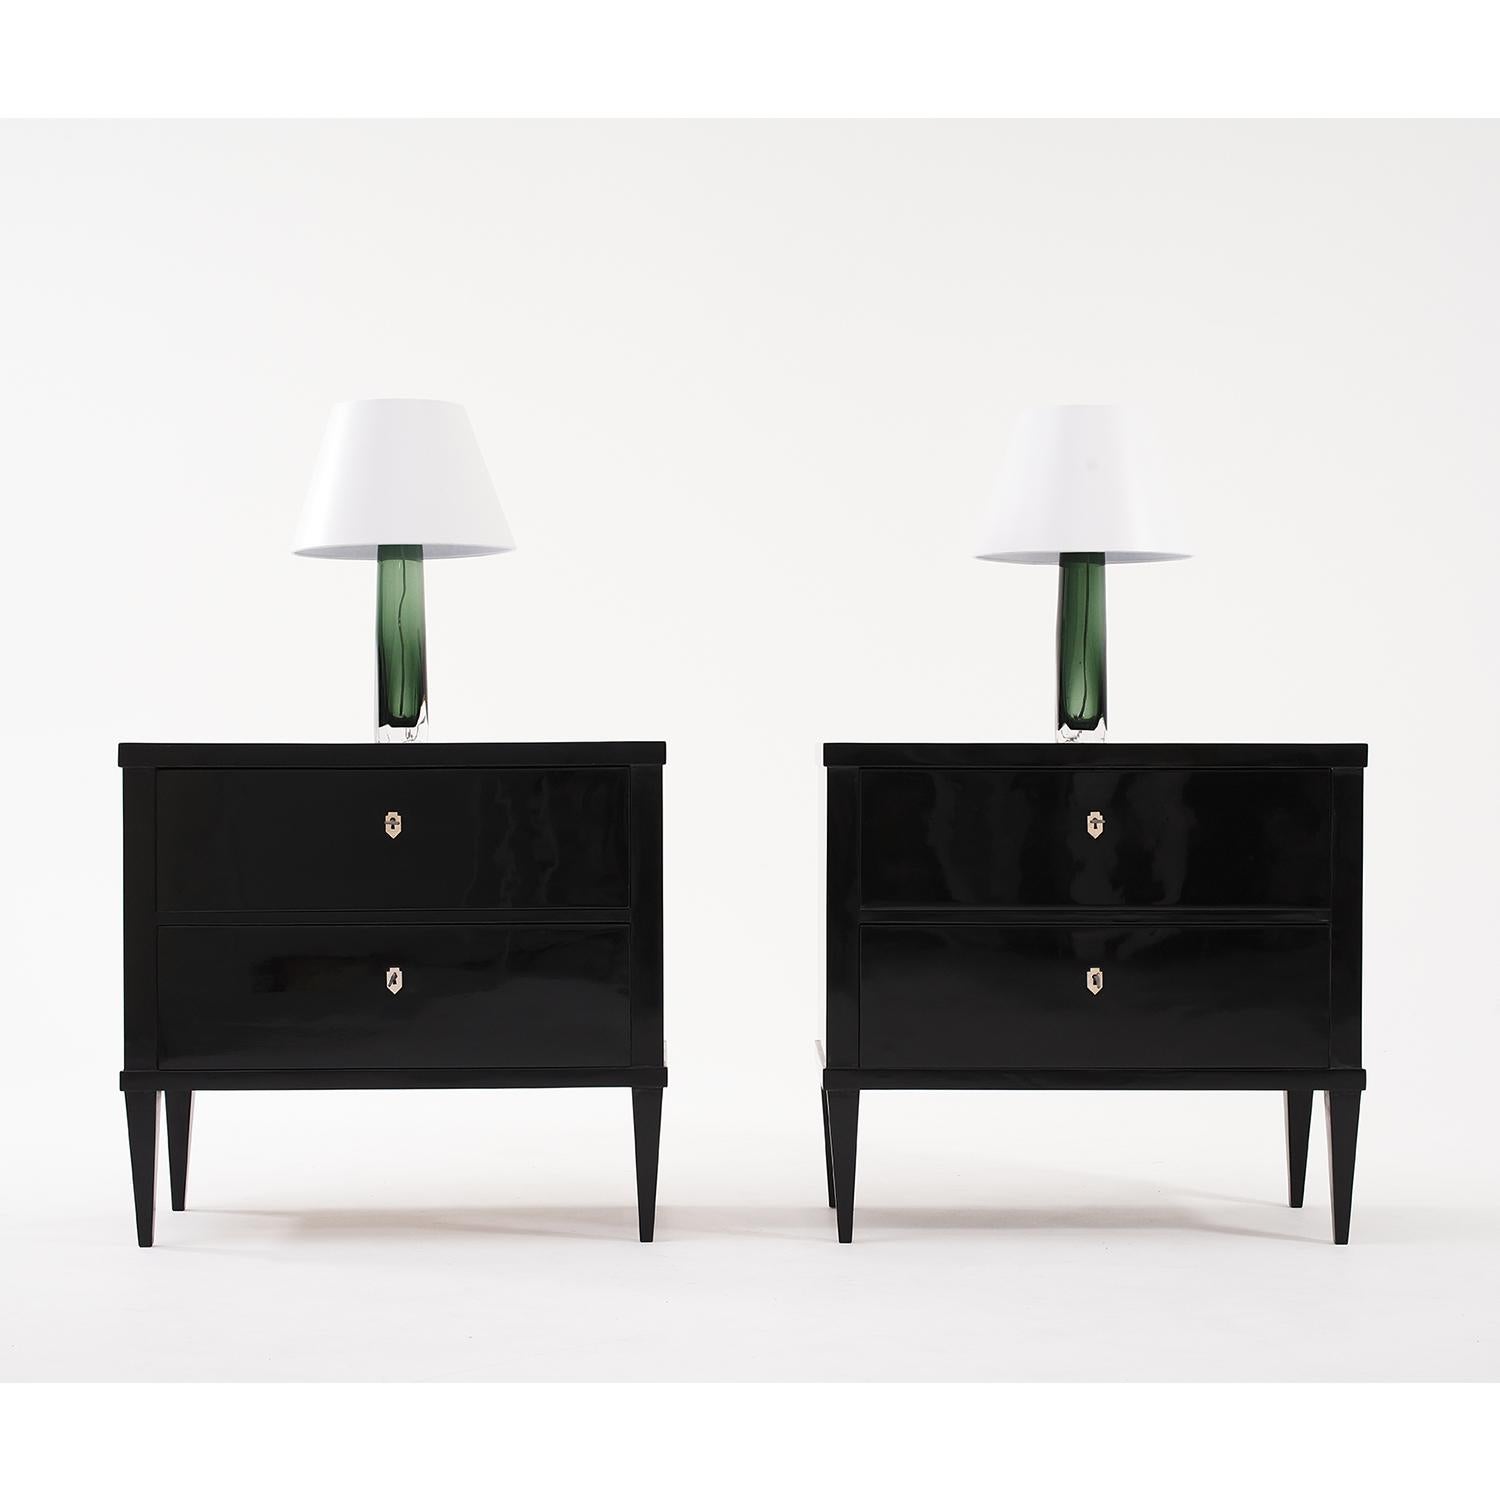 A black, vintage French Art Deco pair of chests made of hand crafted ebonized wood, in good condition. The Parisian commodes are composed with two large drawers, consisting with its original metal hardware and keys. The cupboards are standing on